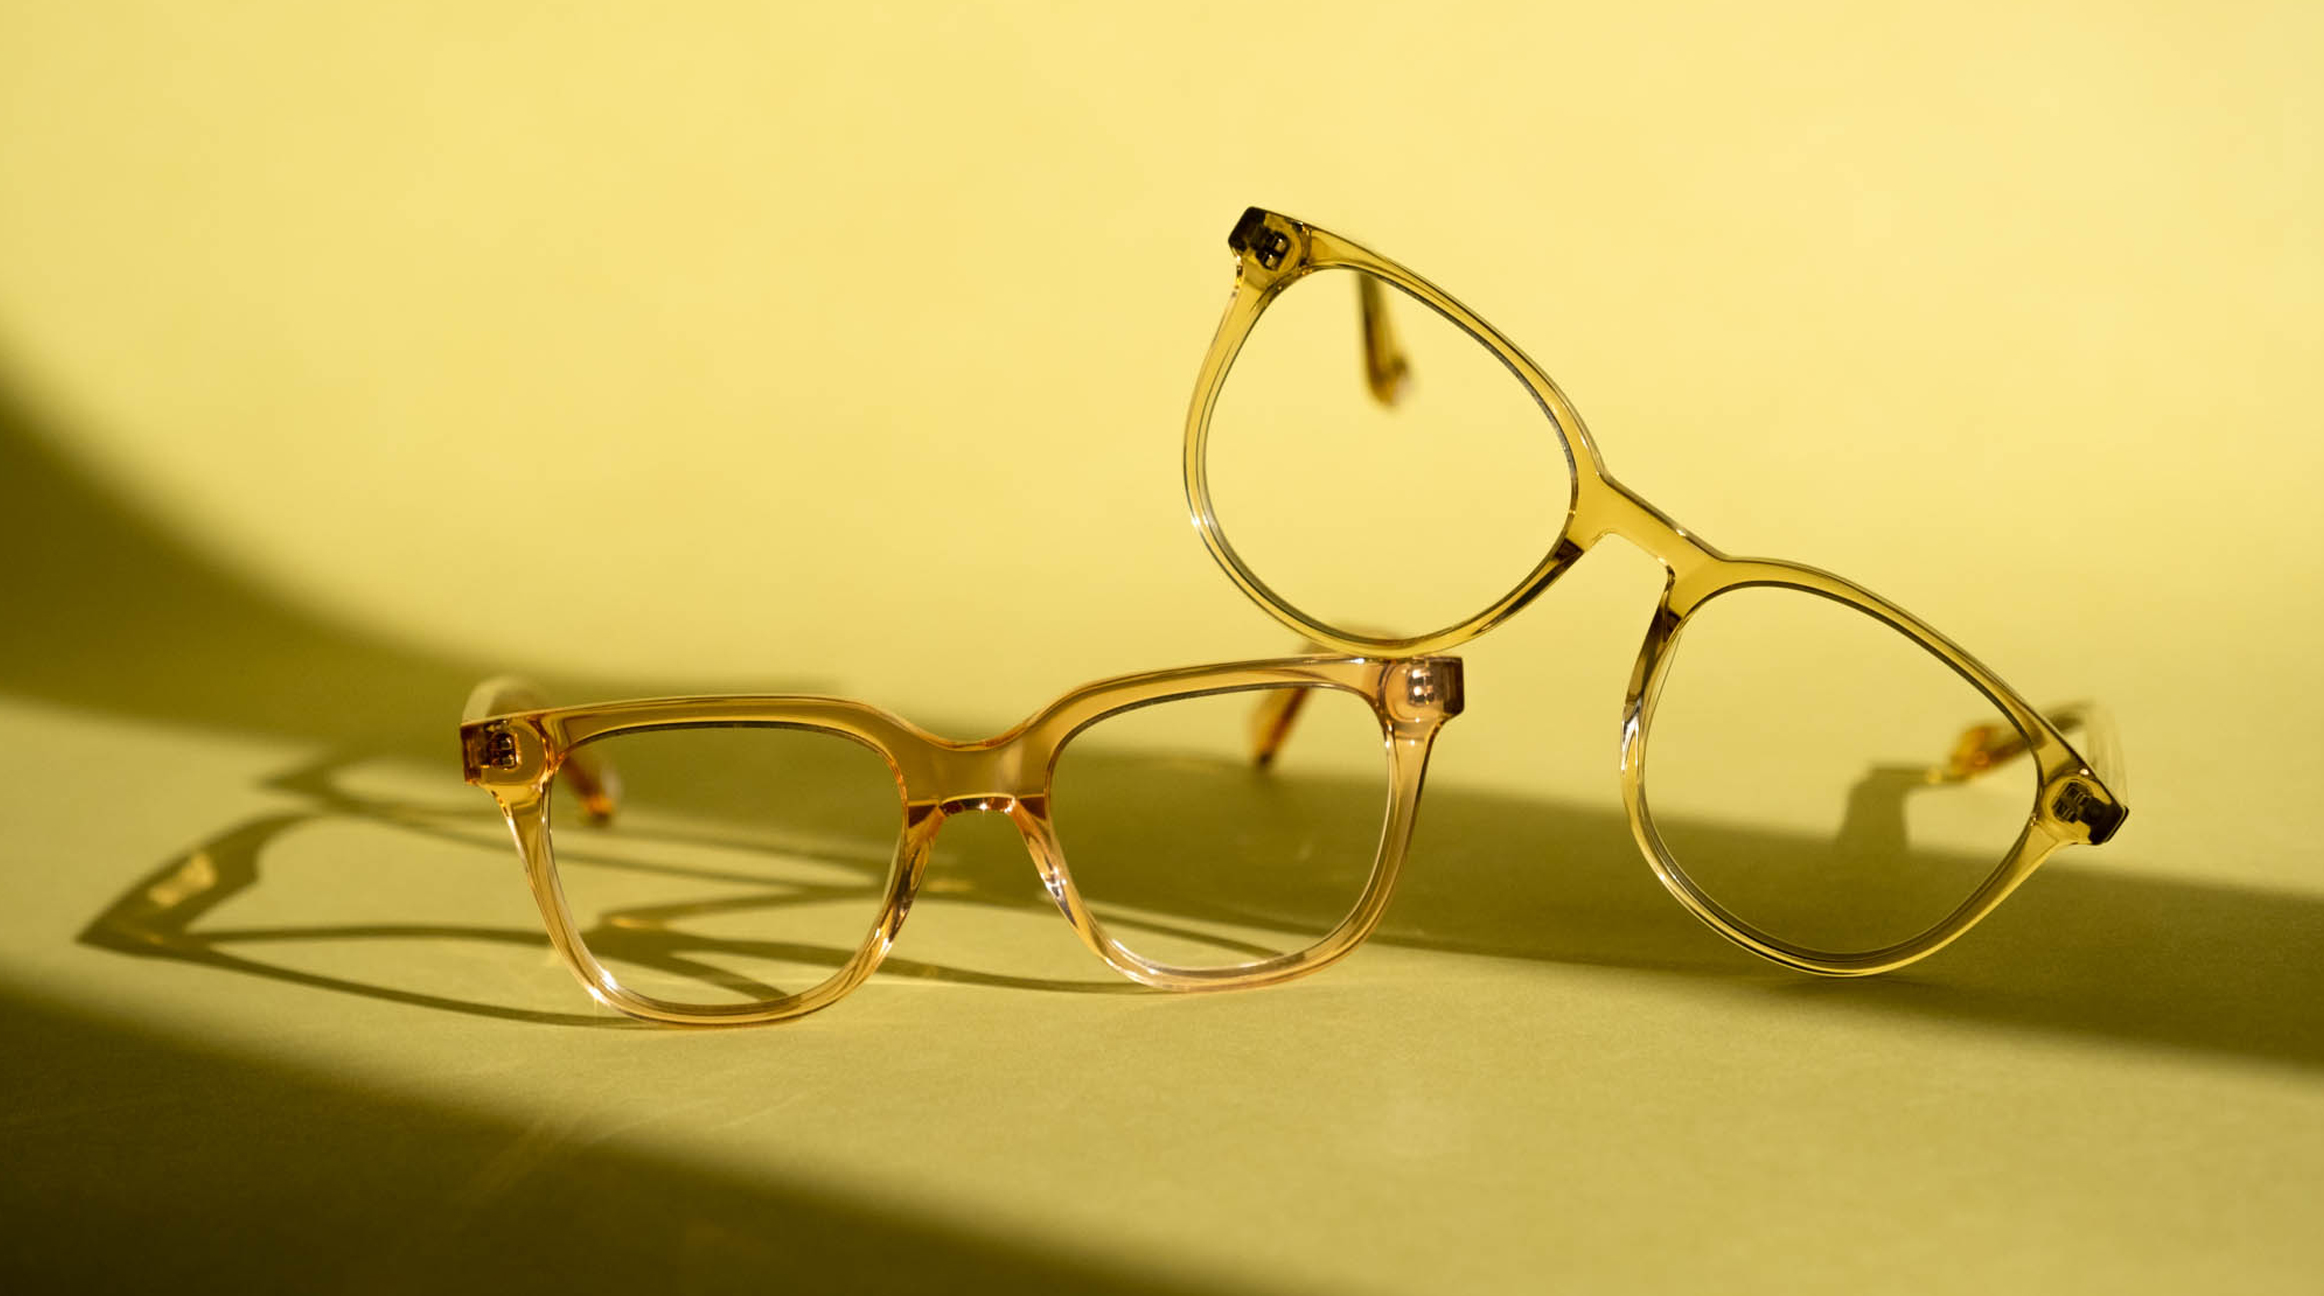 Frames by Hubble Eyeglasses Product Image